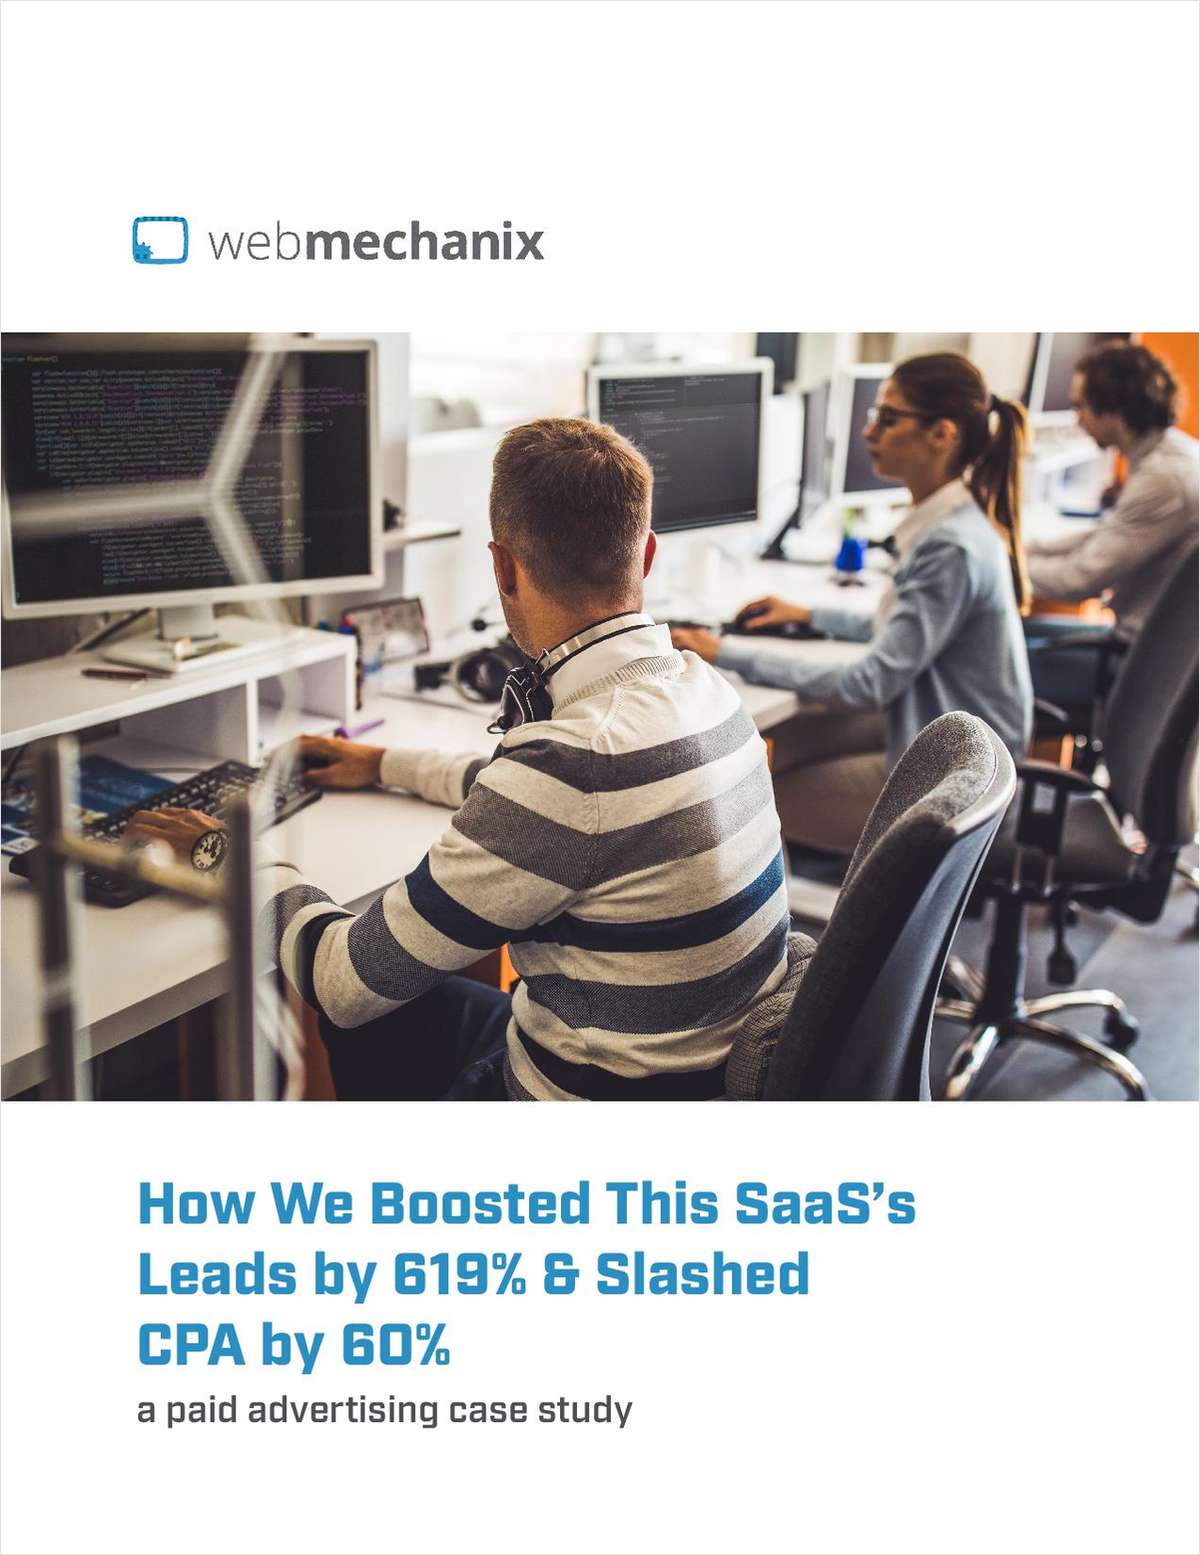 Case Study: SaaS's Leads Boosted by 619% & CPA Slashed by 60%